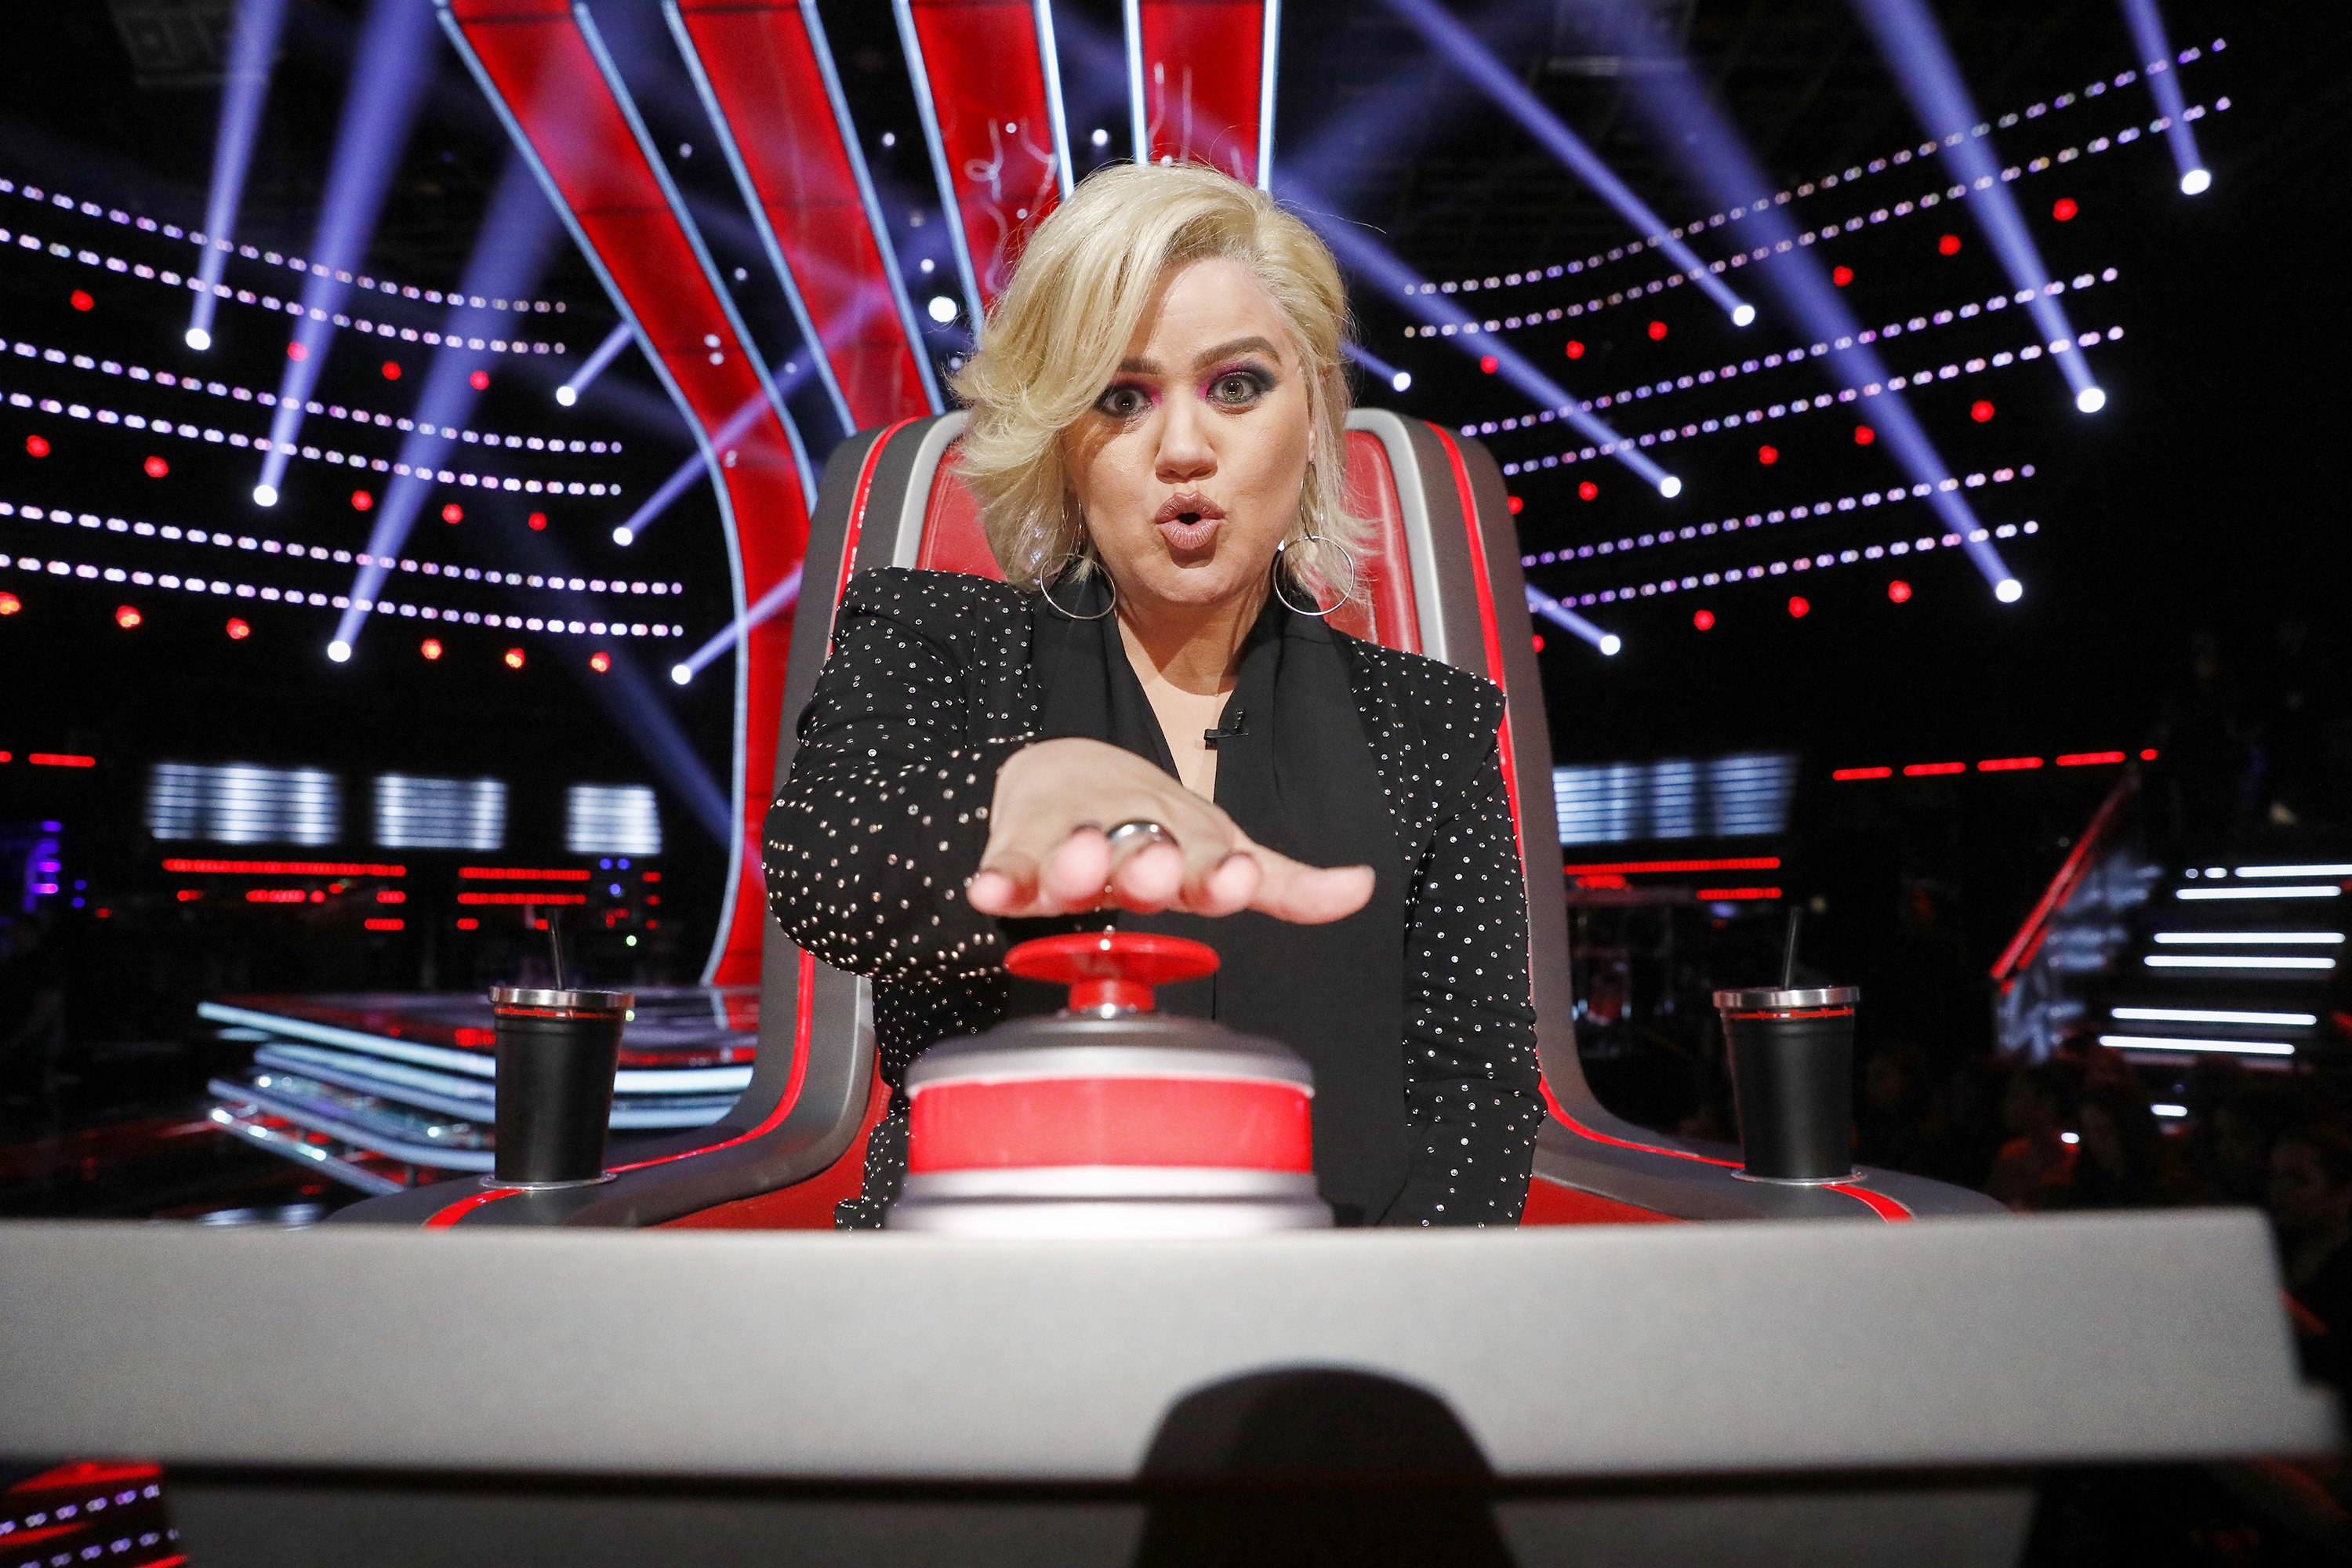 Kelly Clarkson during season 18 of "The Voice." | Source: Getty Images.